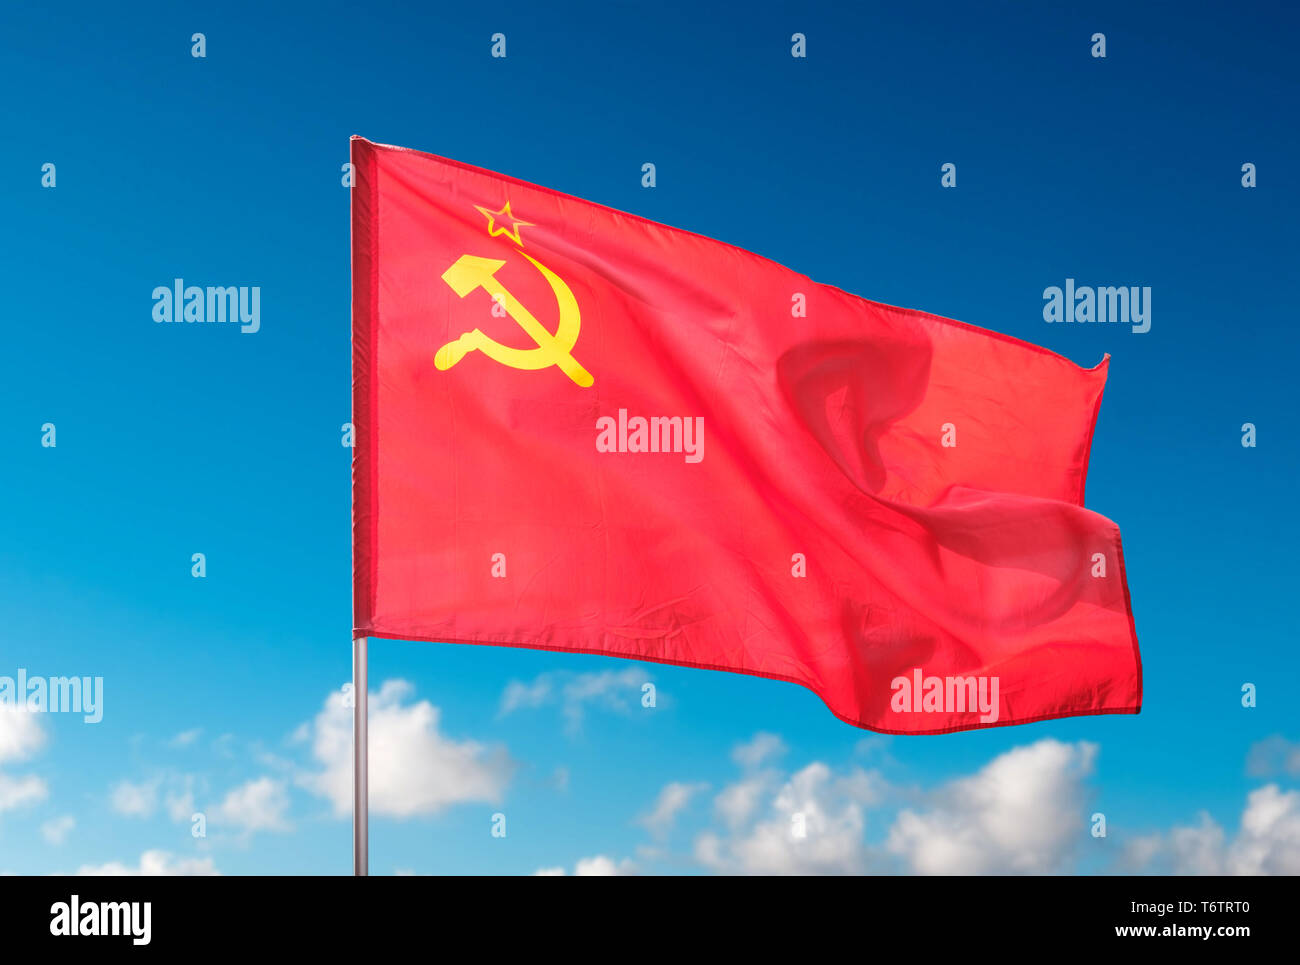 Berlin, Germany - May 01, 2019: The Ussr flag,  State Flag of the Union of Soviet Socialist Republics Stock Photo